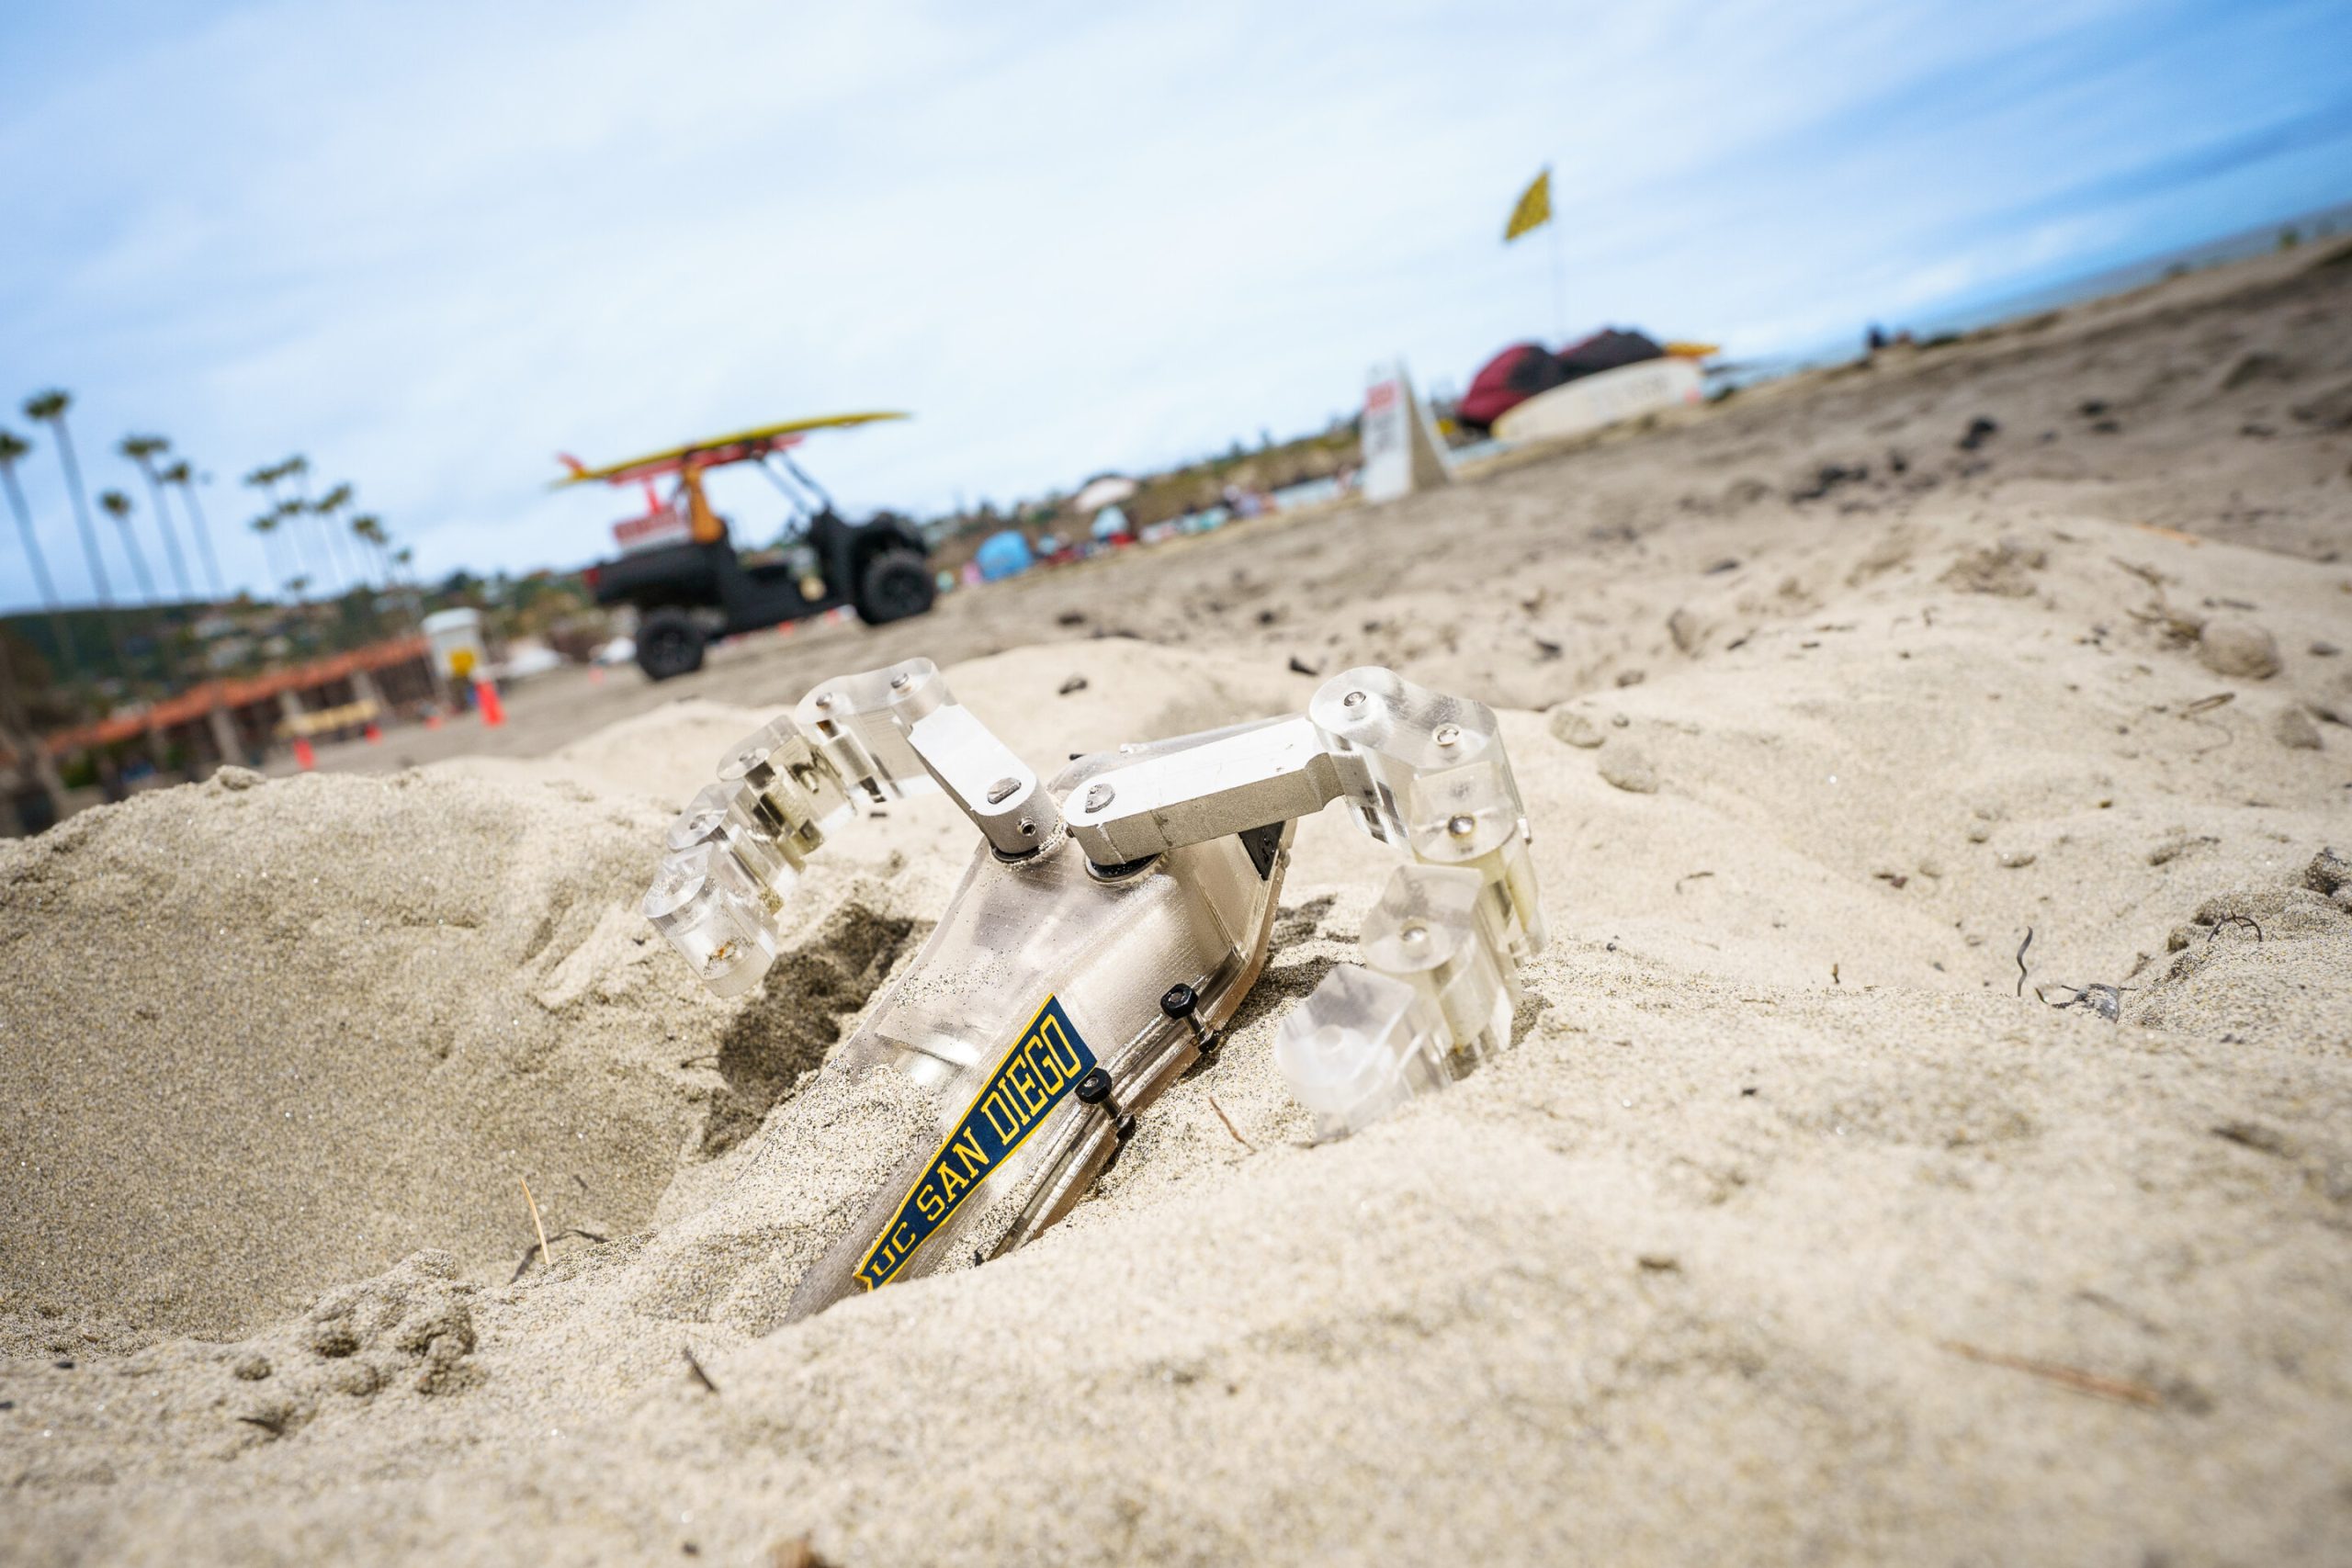 Bot inspired by baby turtles can swim under the sand